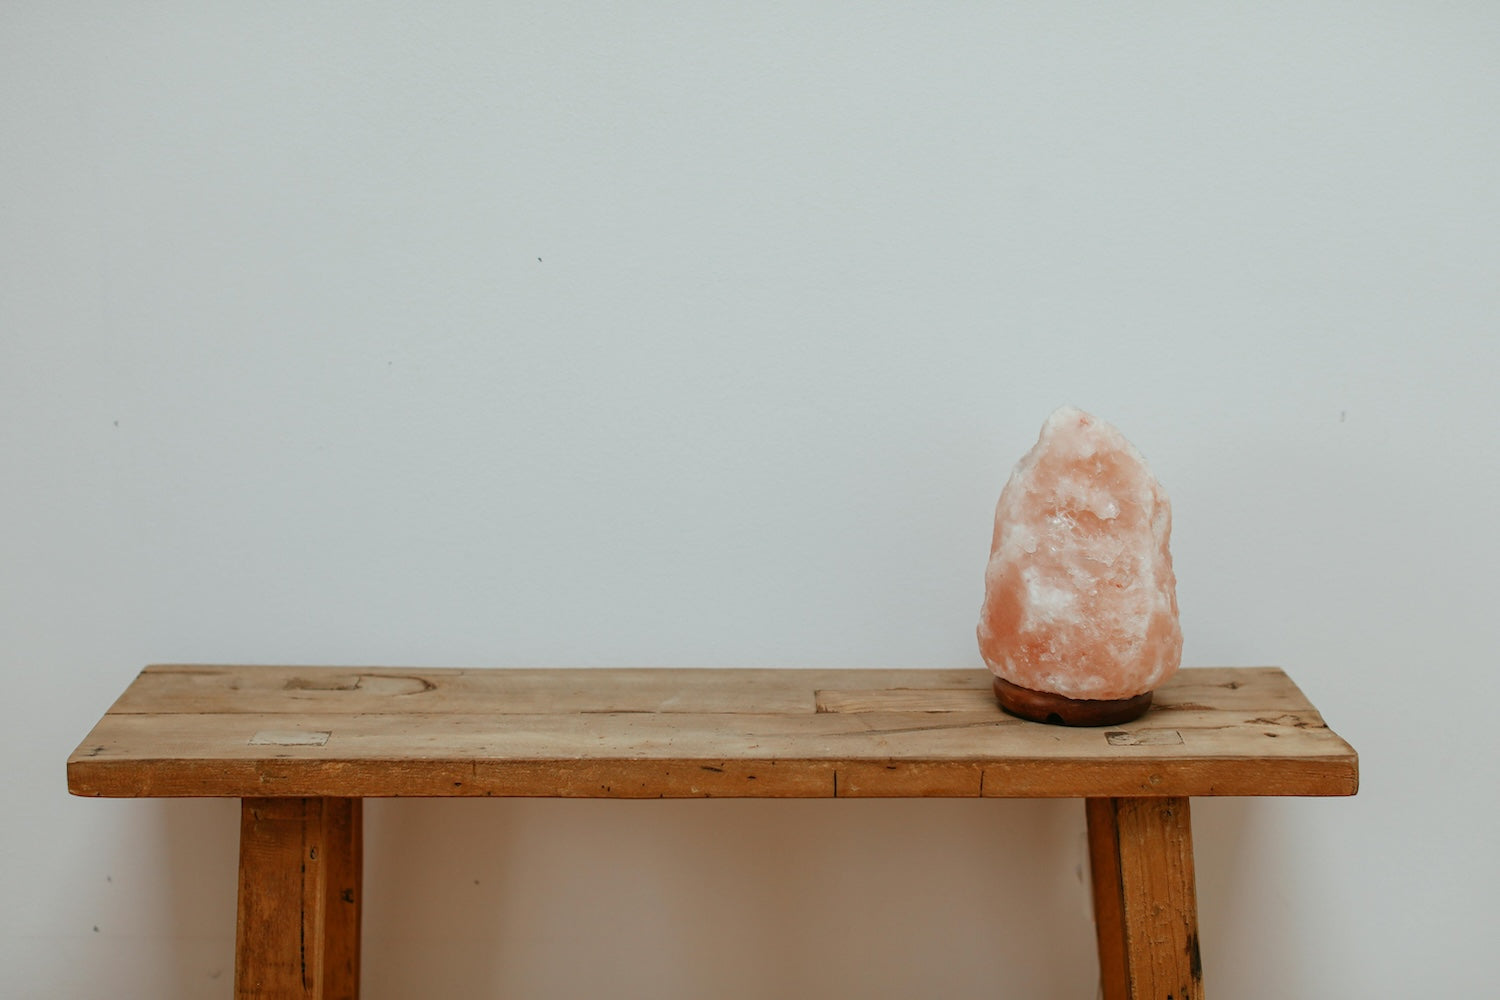 Himalayan salt lamp on a rustic wooden bench against a white wall.